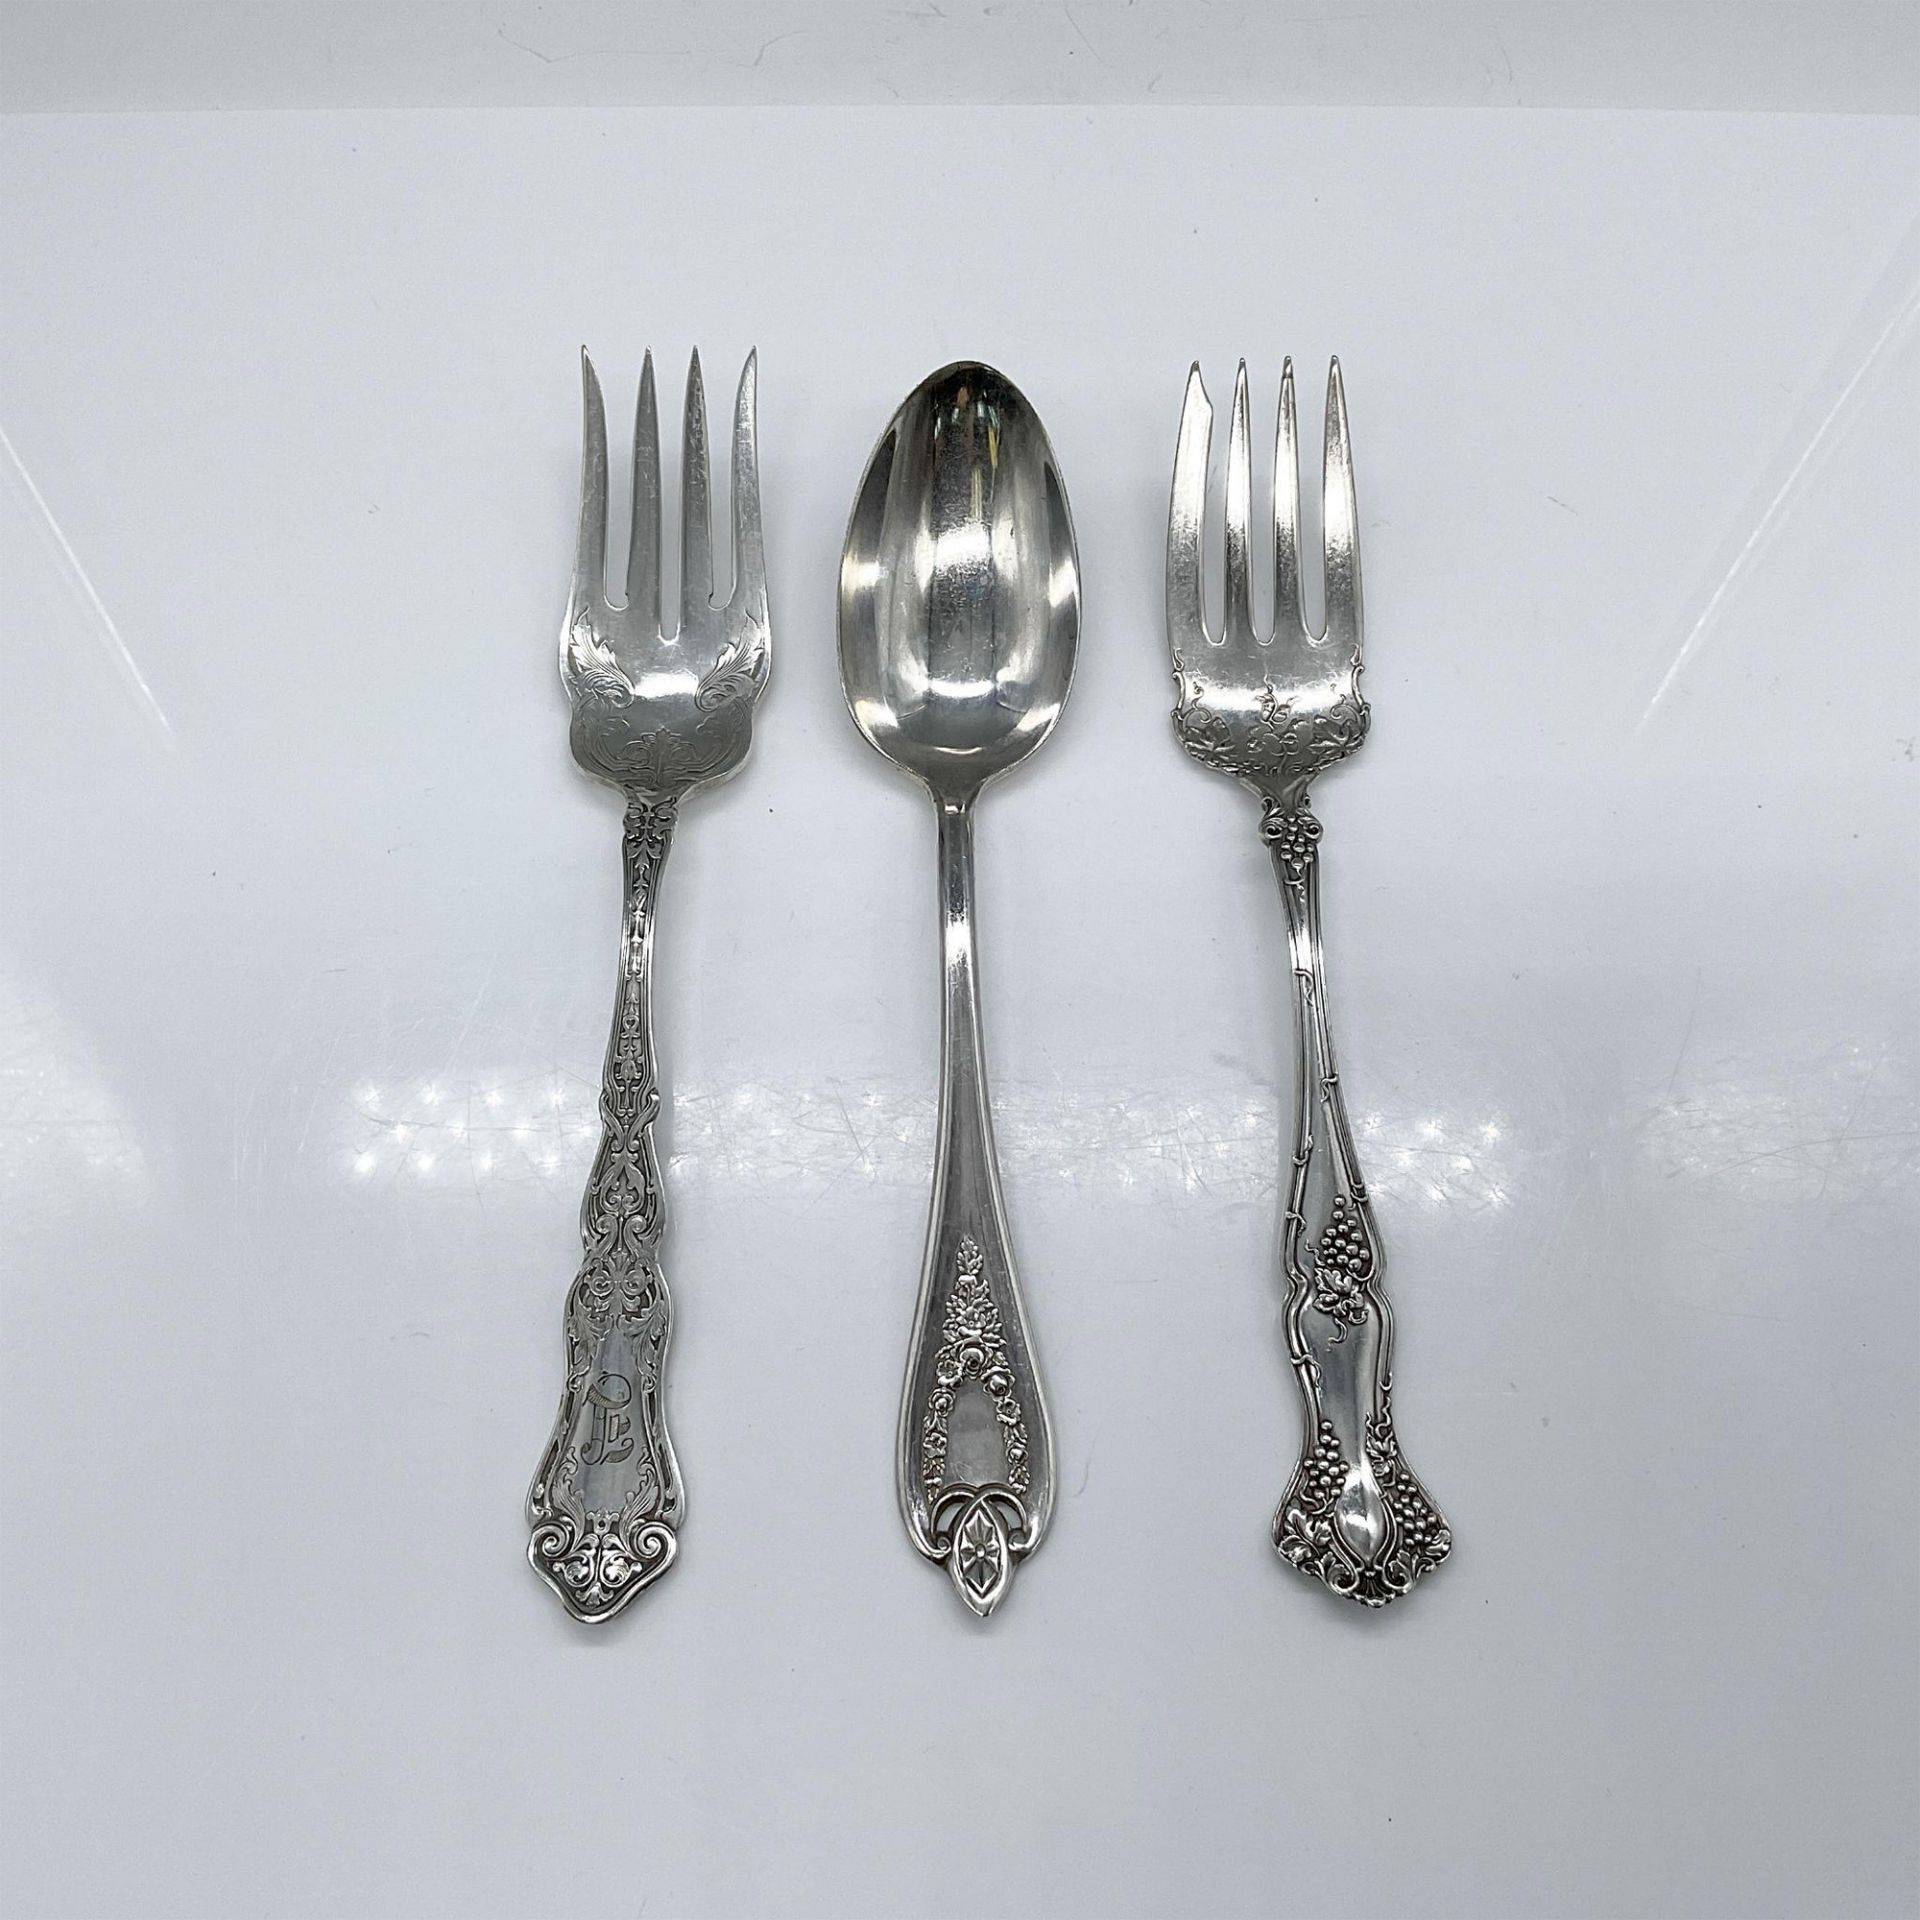 3pc Rogers Silver Plated Serving Forks and Spoon - Image 2 of 3